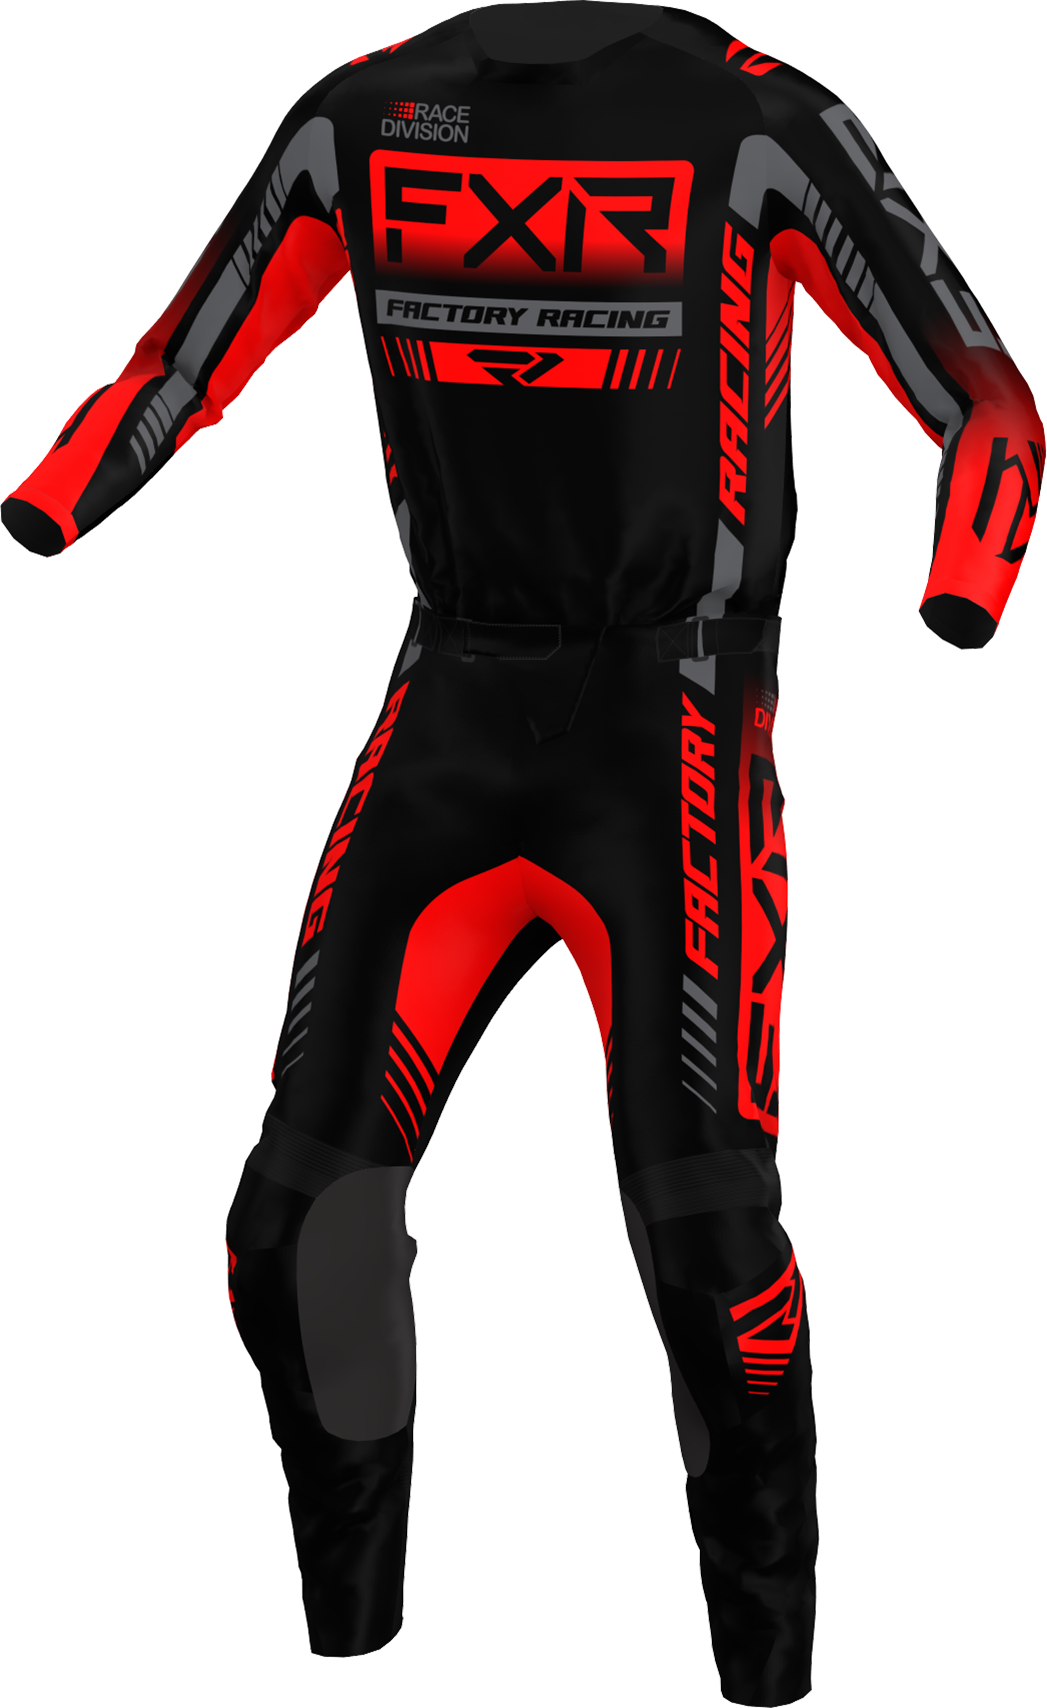 A 3D image of FXR's Clutch Pro MX Jersey and Pant in Black/Red/Char colorway